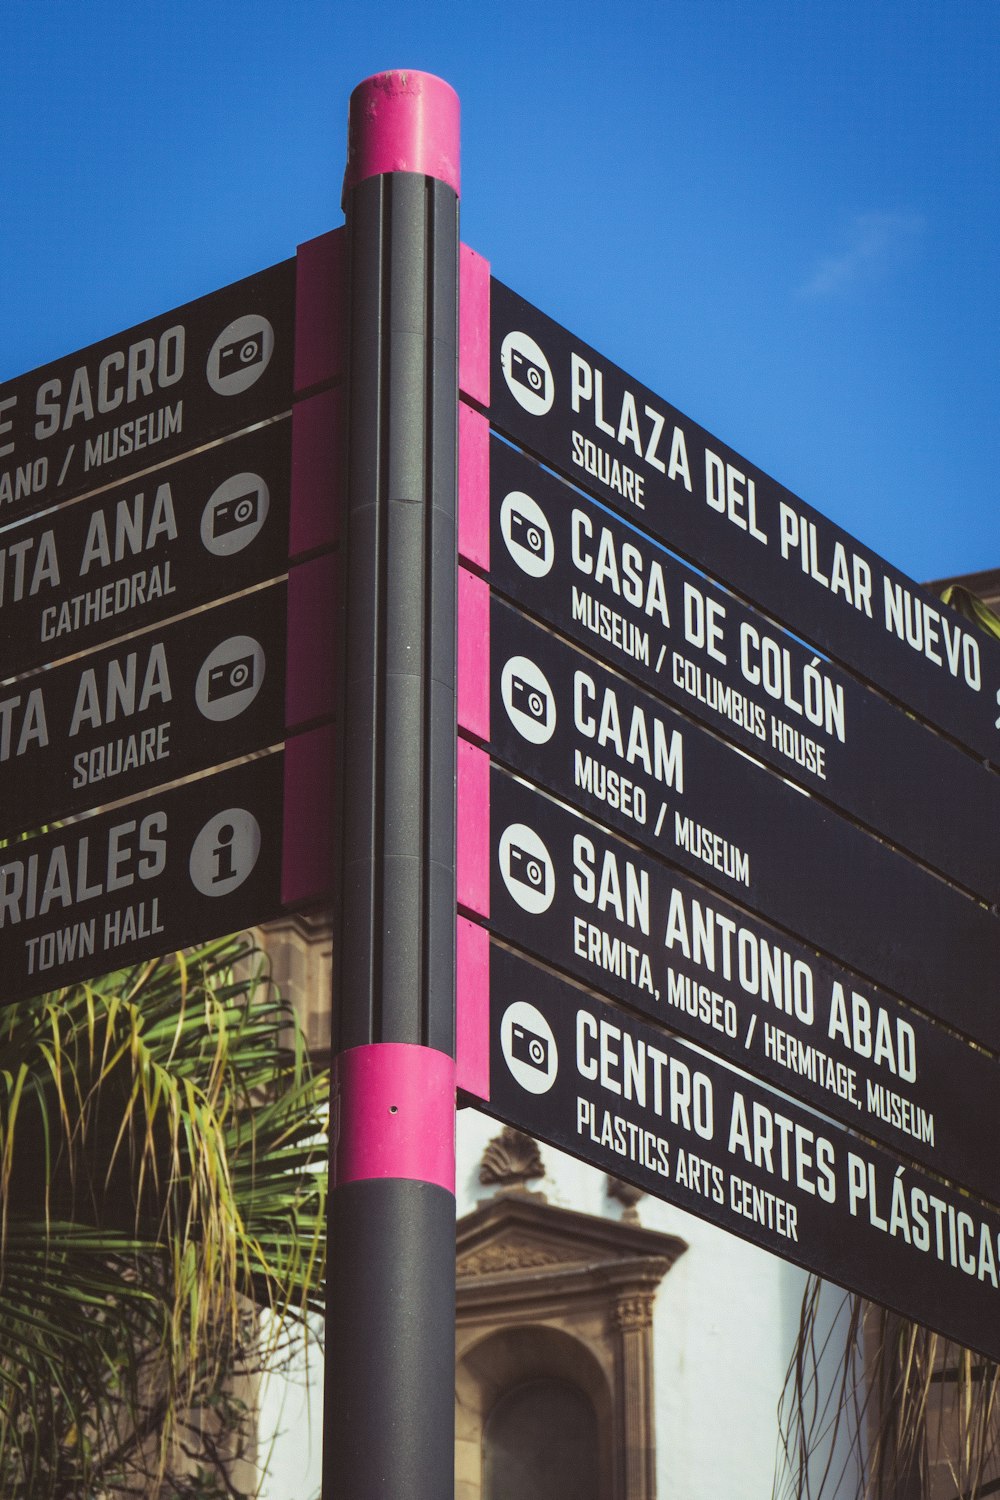 a sign board with different street signs